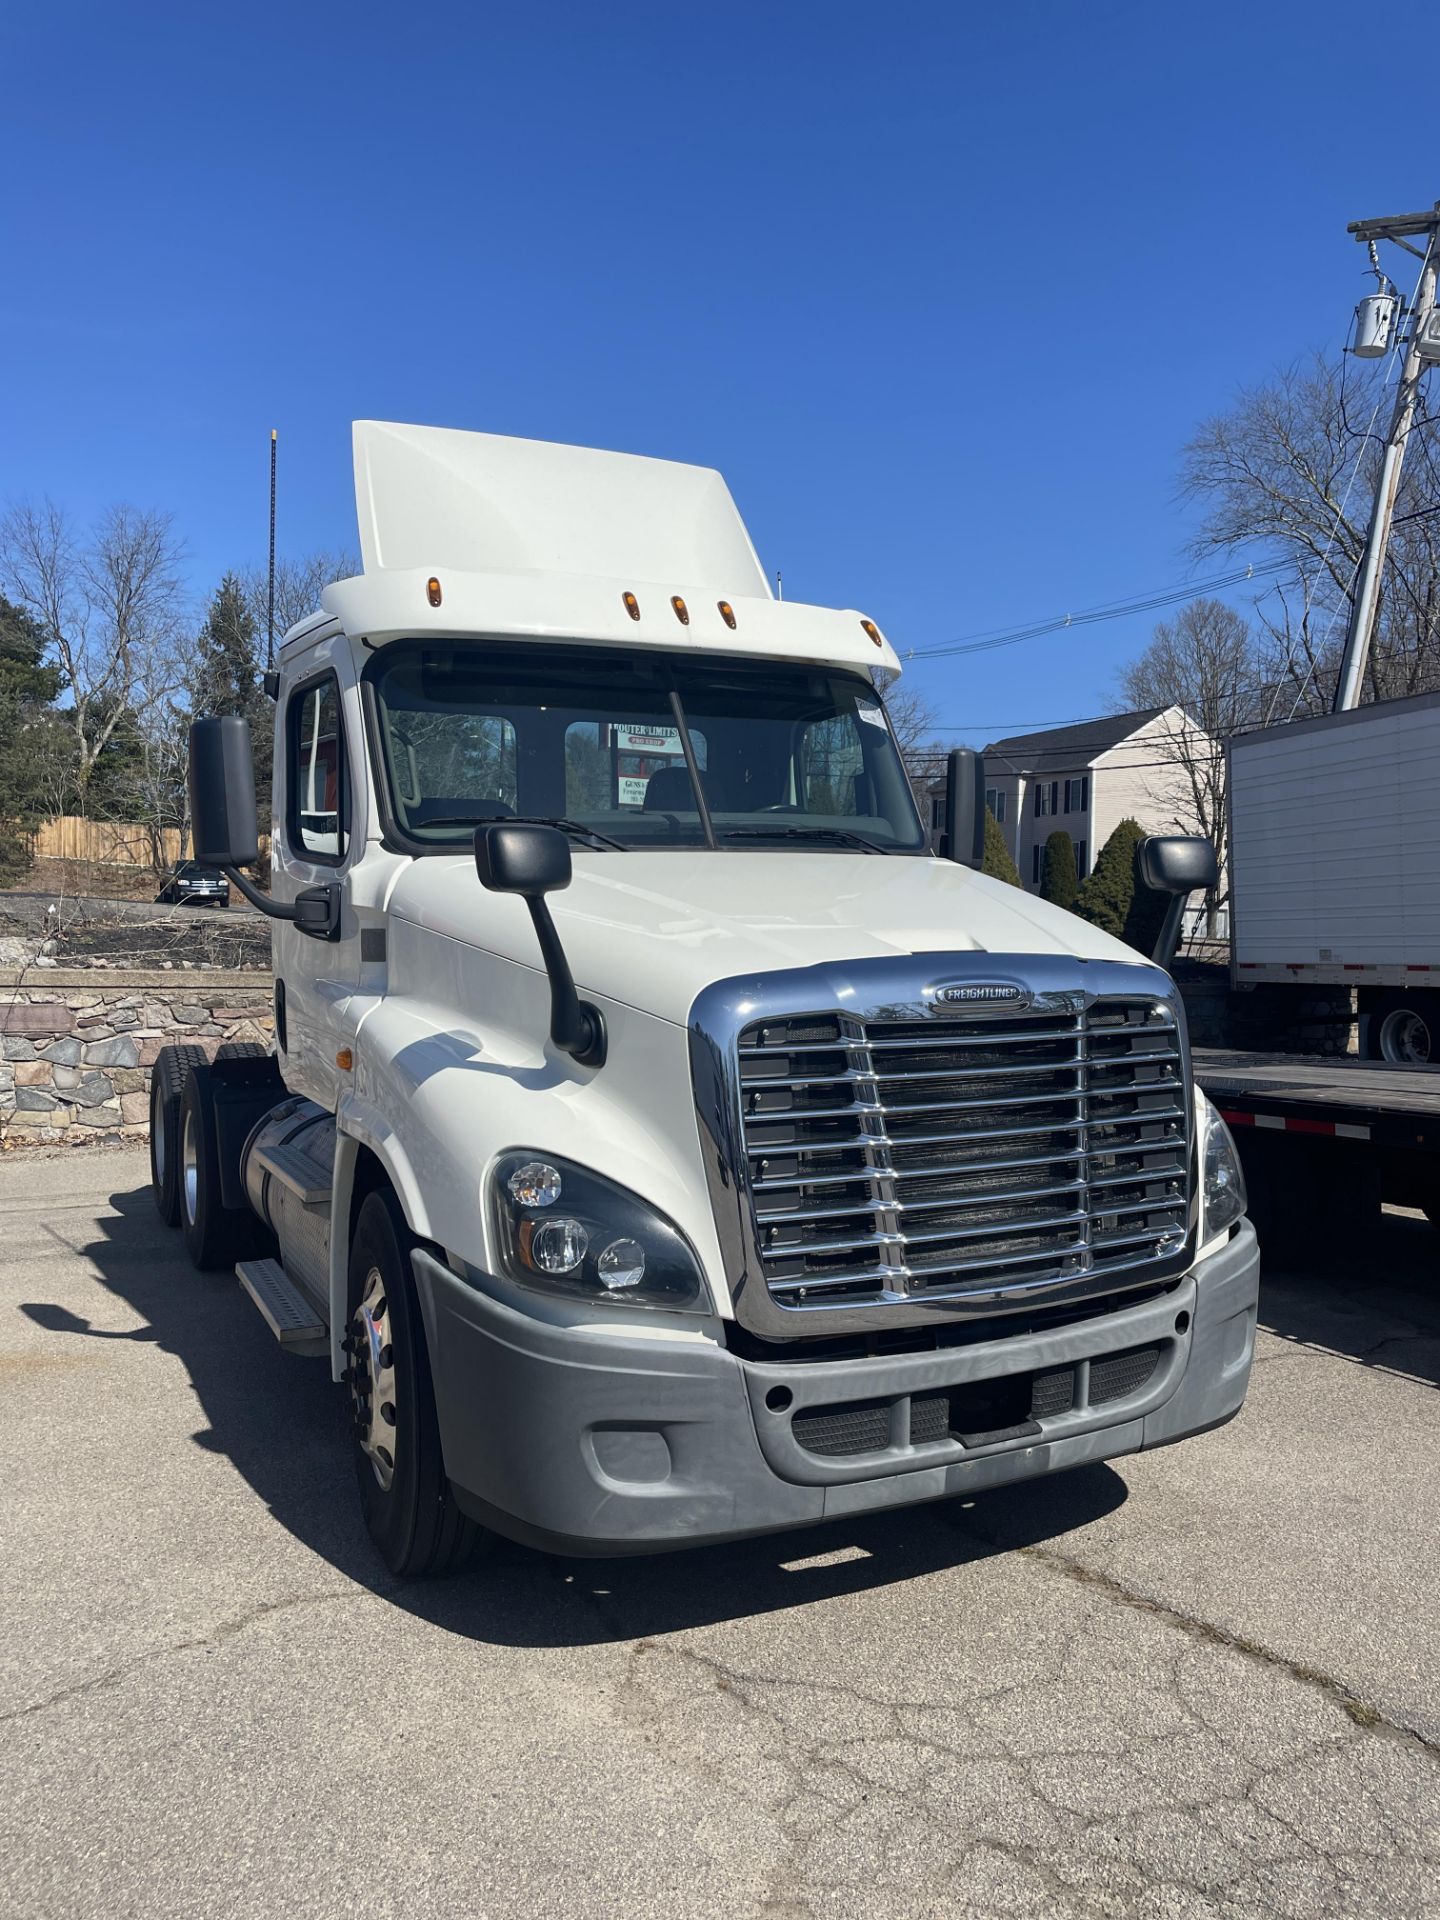 2016 Freightliner Cascadia 10 Wheel, Tandem Axle Day Cab Tractor,Detroit DD13 - 500 HP Motor, Auto T - Image 3 of 18